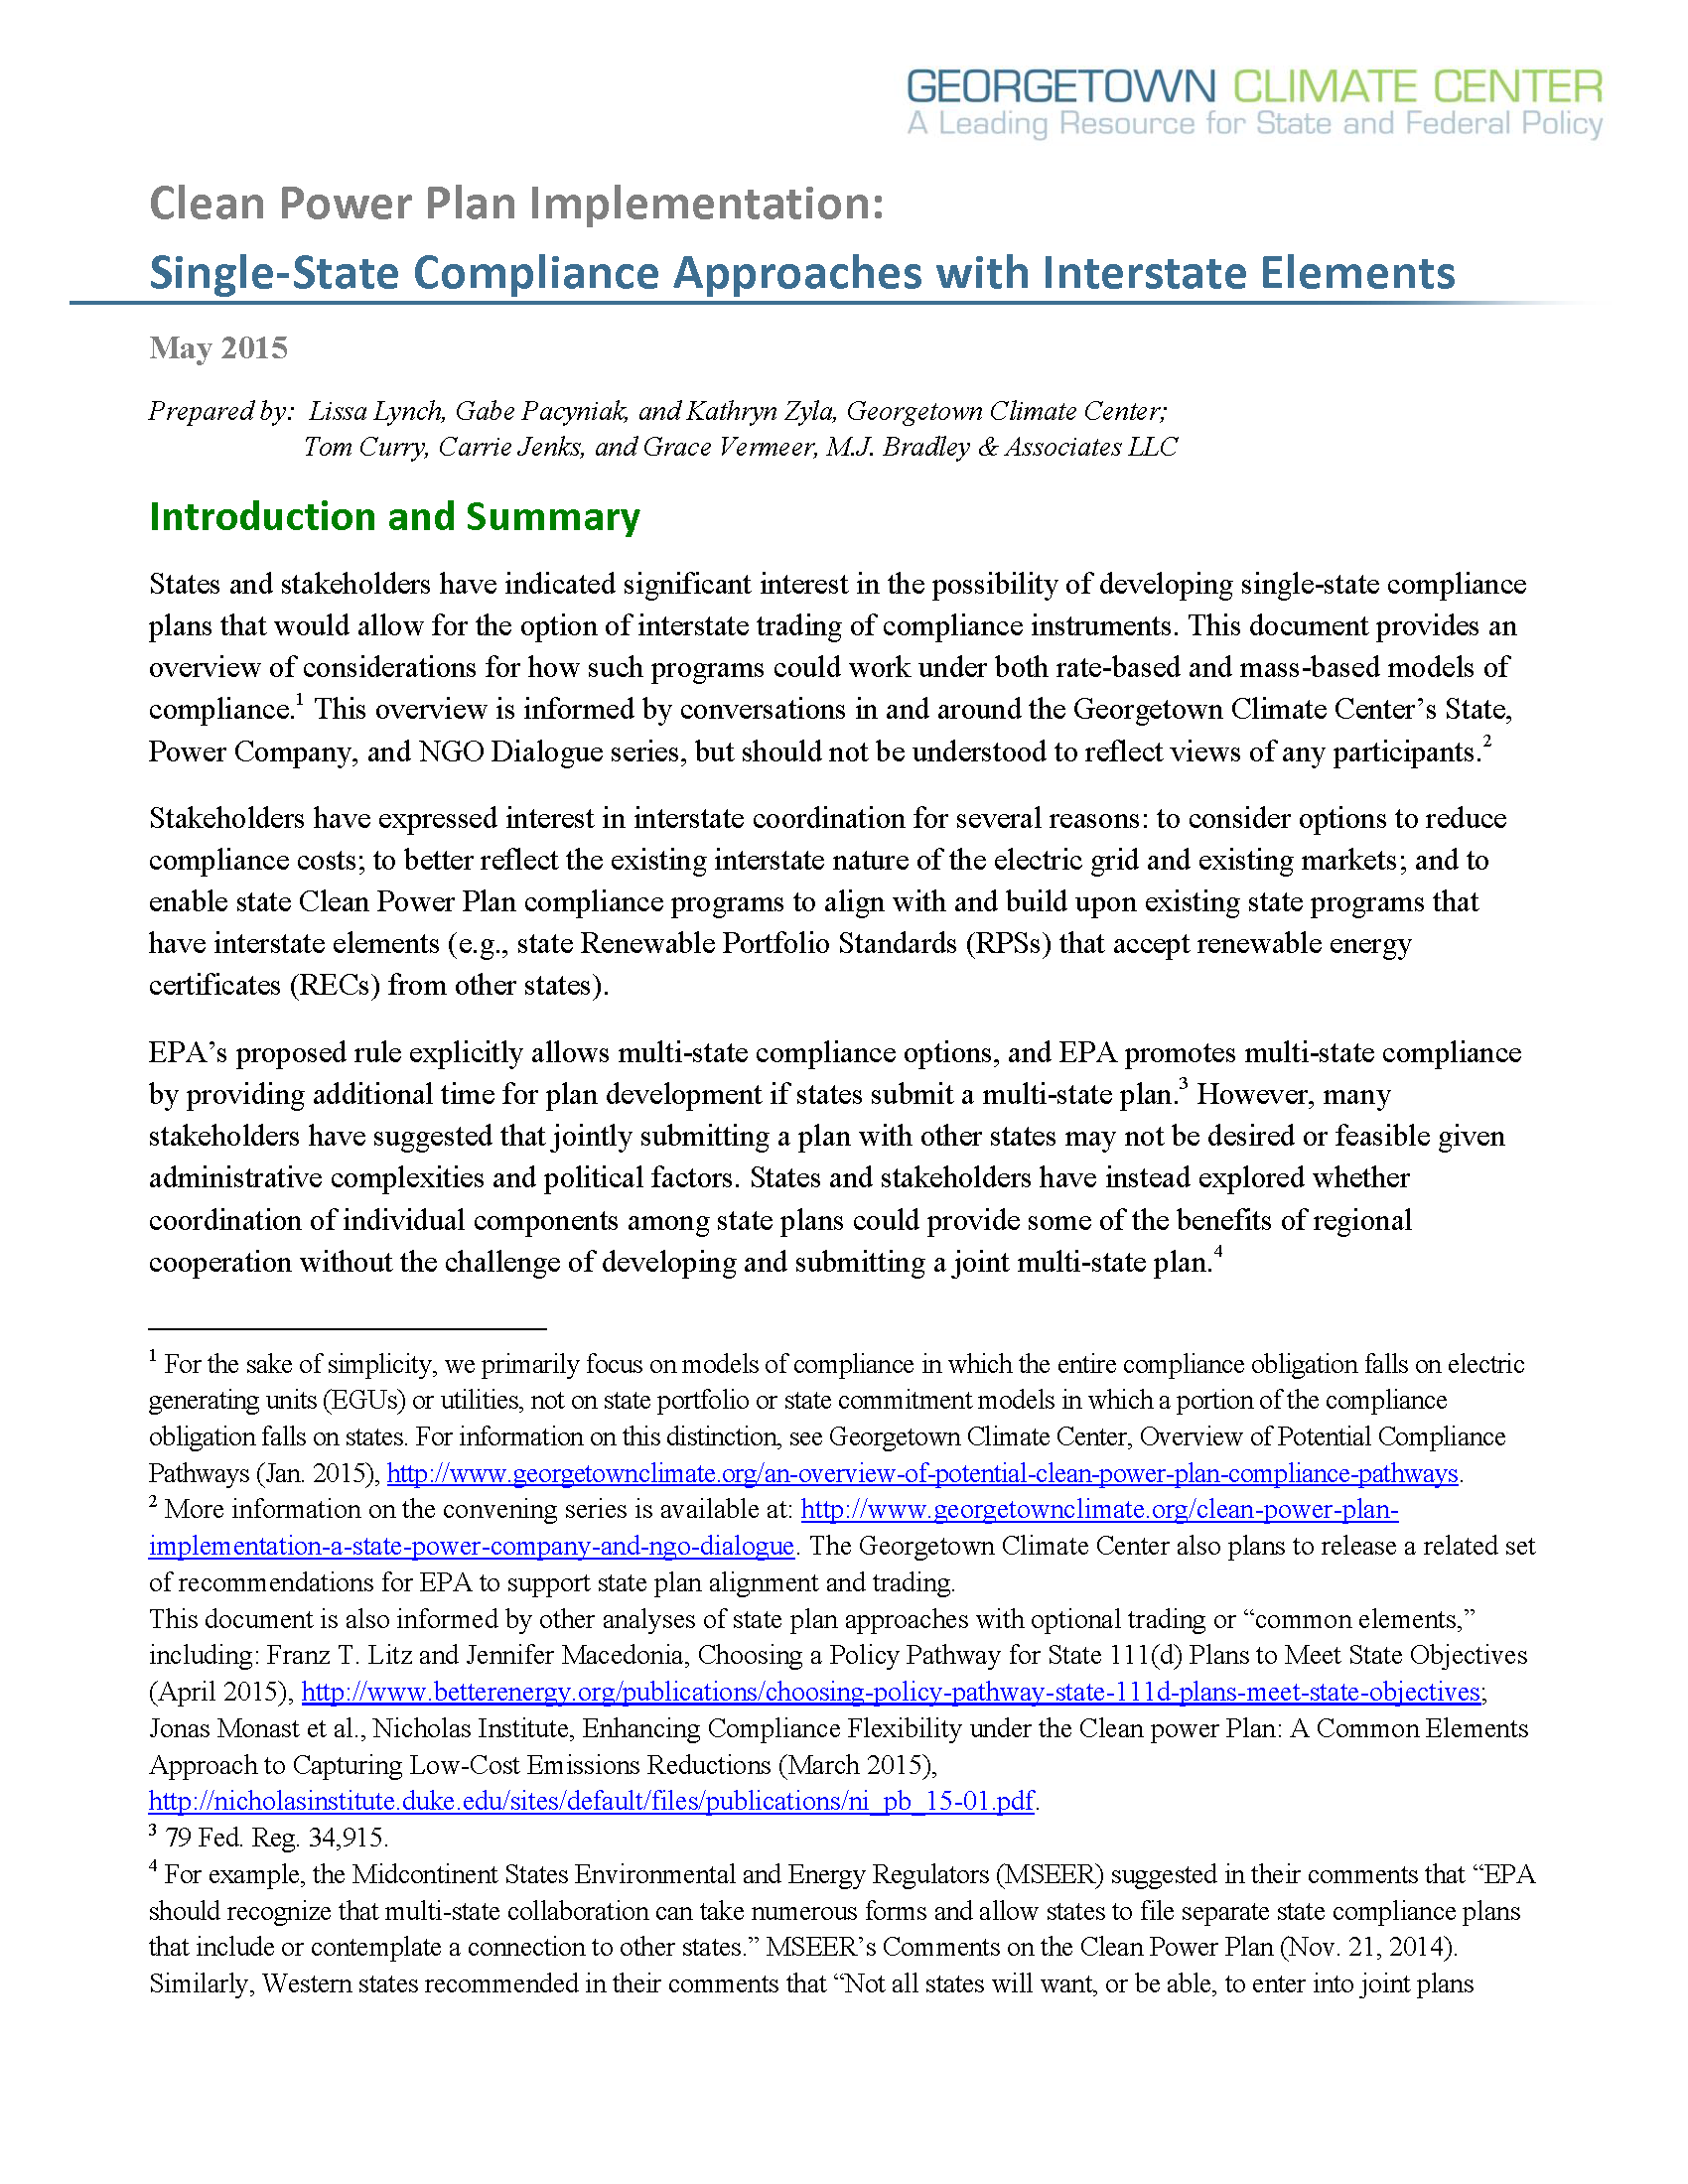 Single State Clean Power Plan Compliance Approaches with Interstate Elements